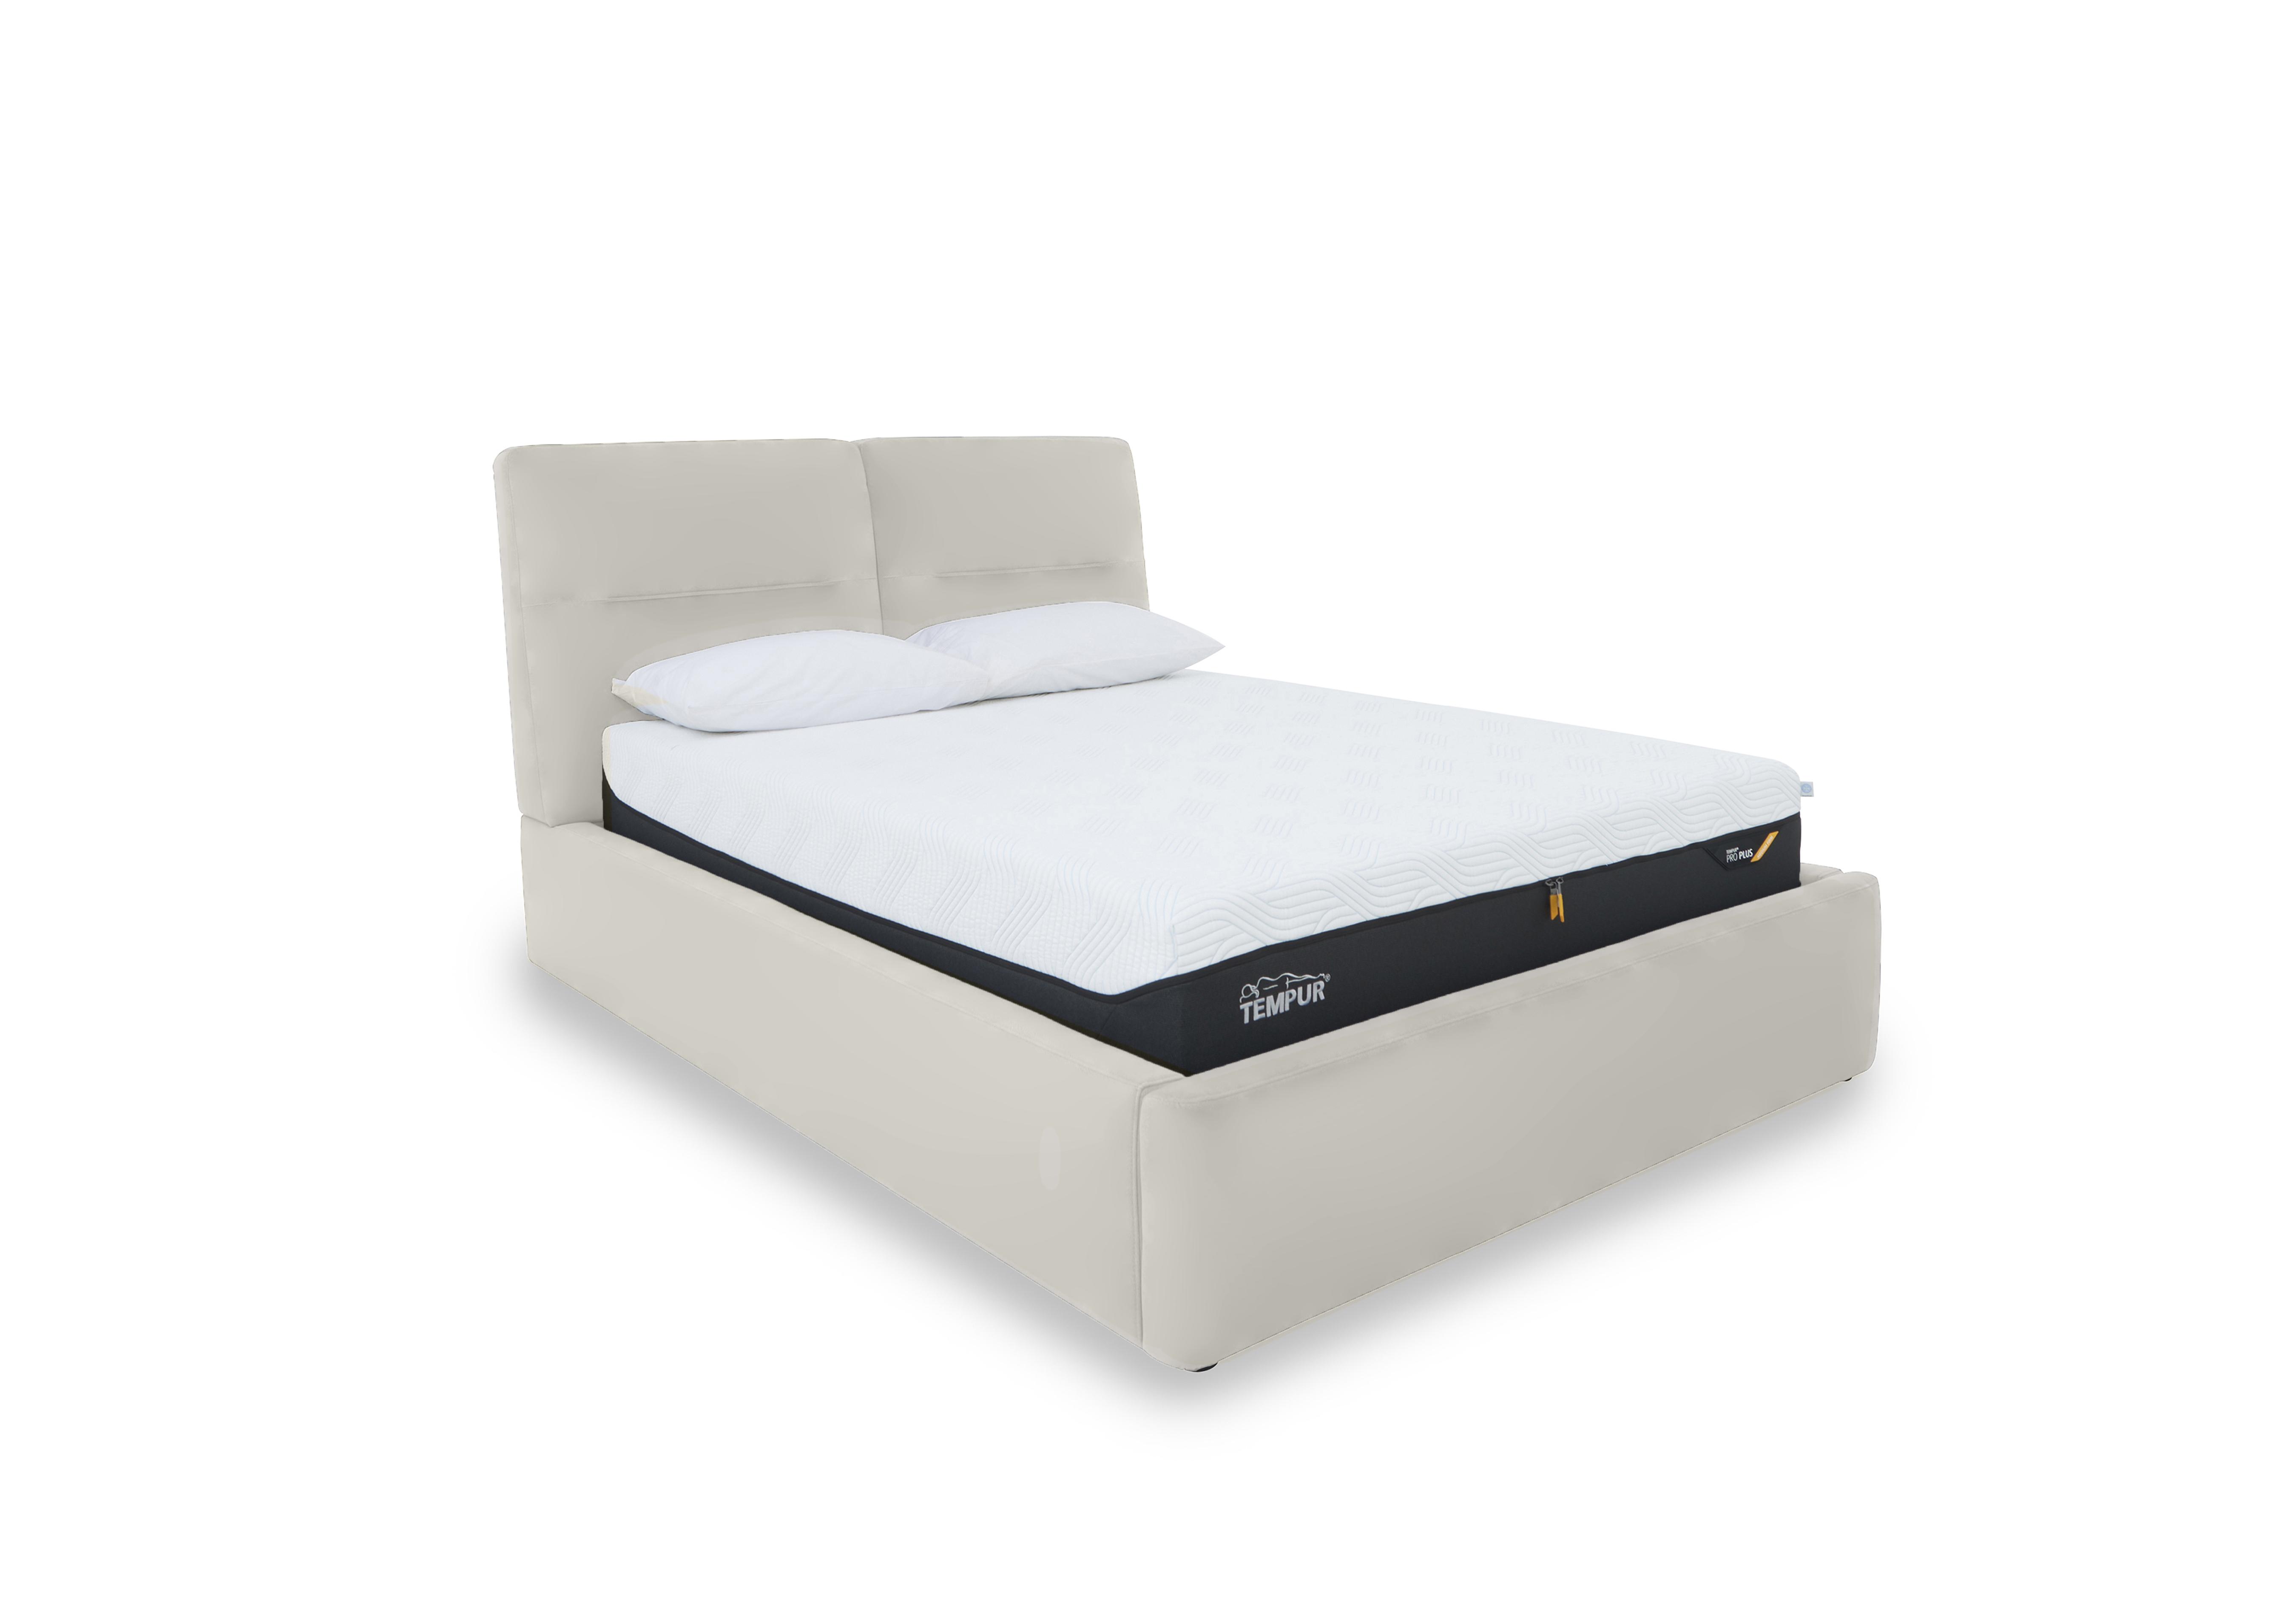 Stark Leather Manual Ottoman Bed Frame in Nw-521e Frost on Furniture Village